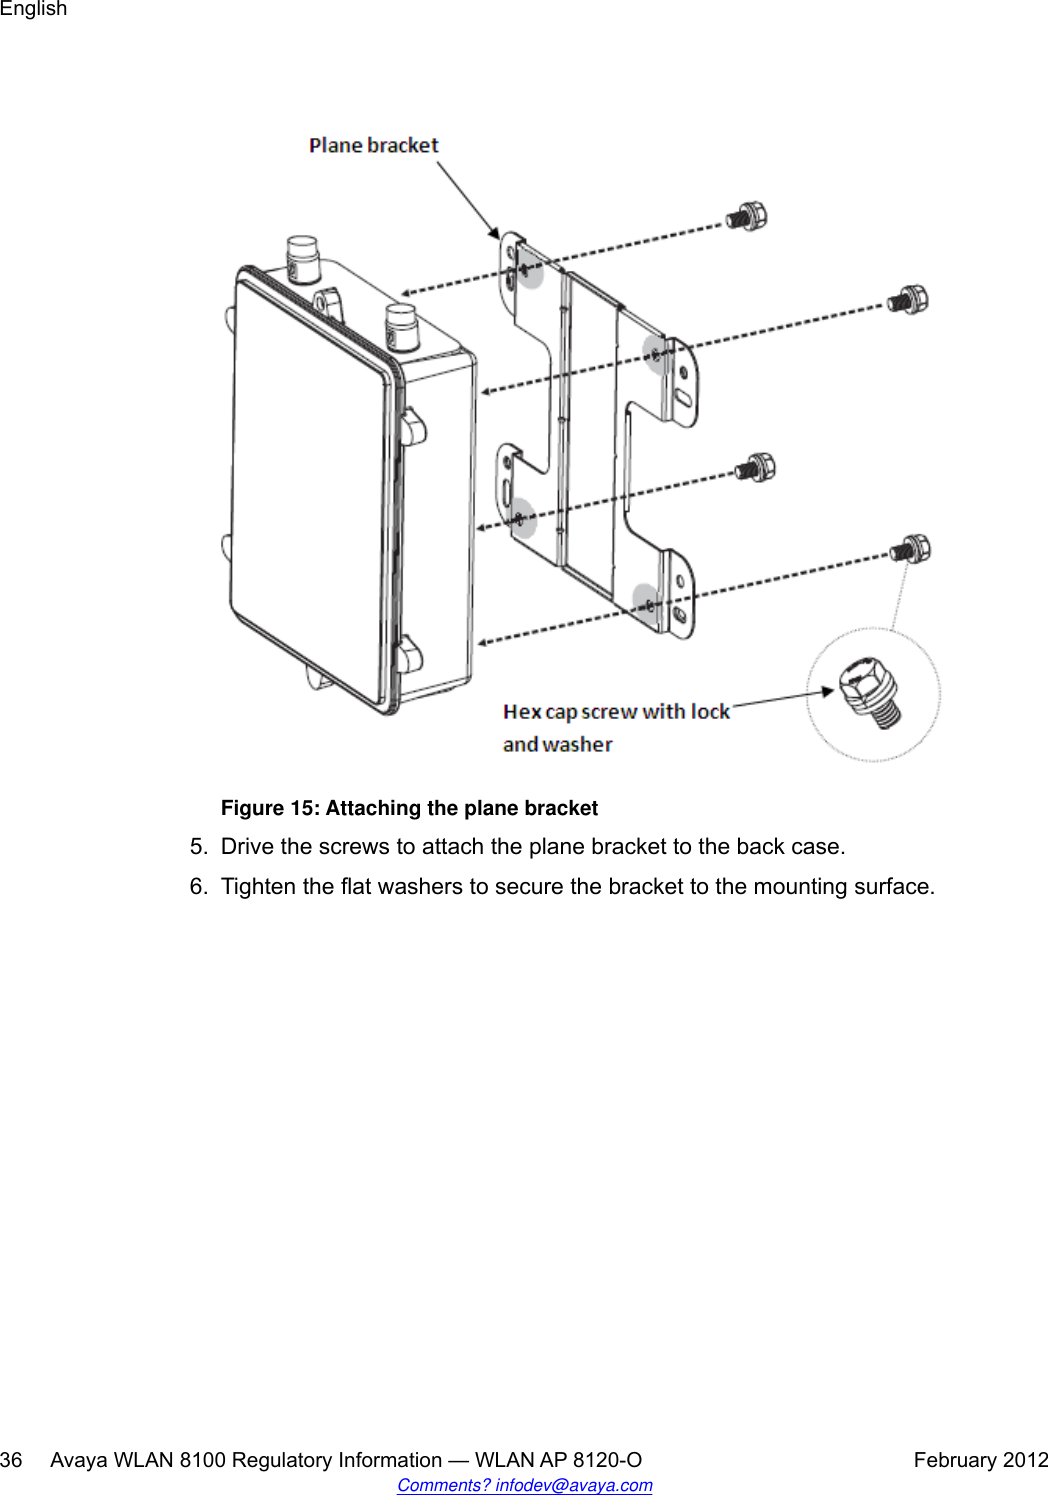 Figure 15: Attaching the plane bracket5. Drive the screws to attach the plane bracket to the back case.6. Tighten the flat washers to secure the bracket to the mounting surface.English36     Avaya WLAN 8100 Regulatory Information — WLAN AP 8120-O February 2012Comments? infodev@avaya.com